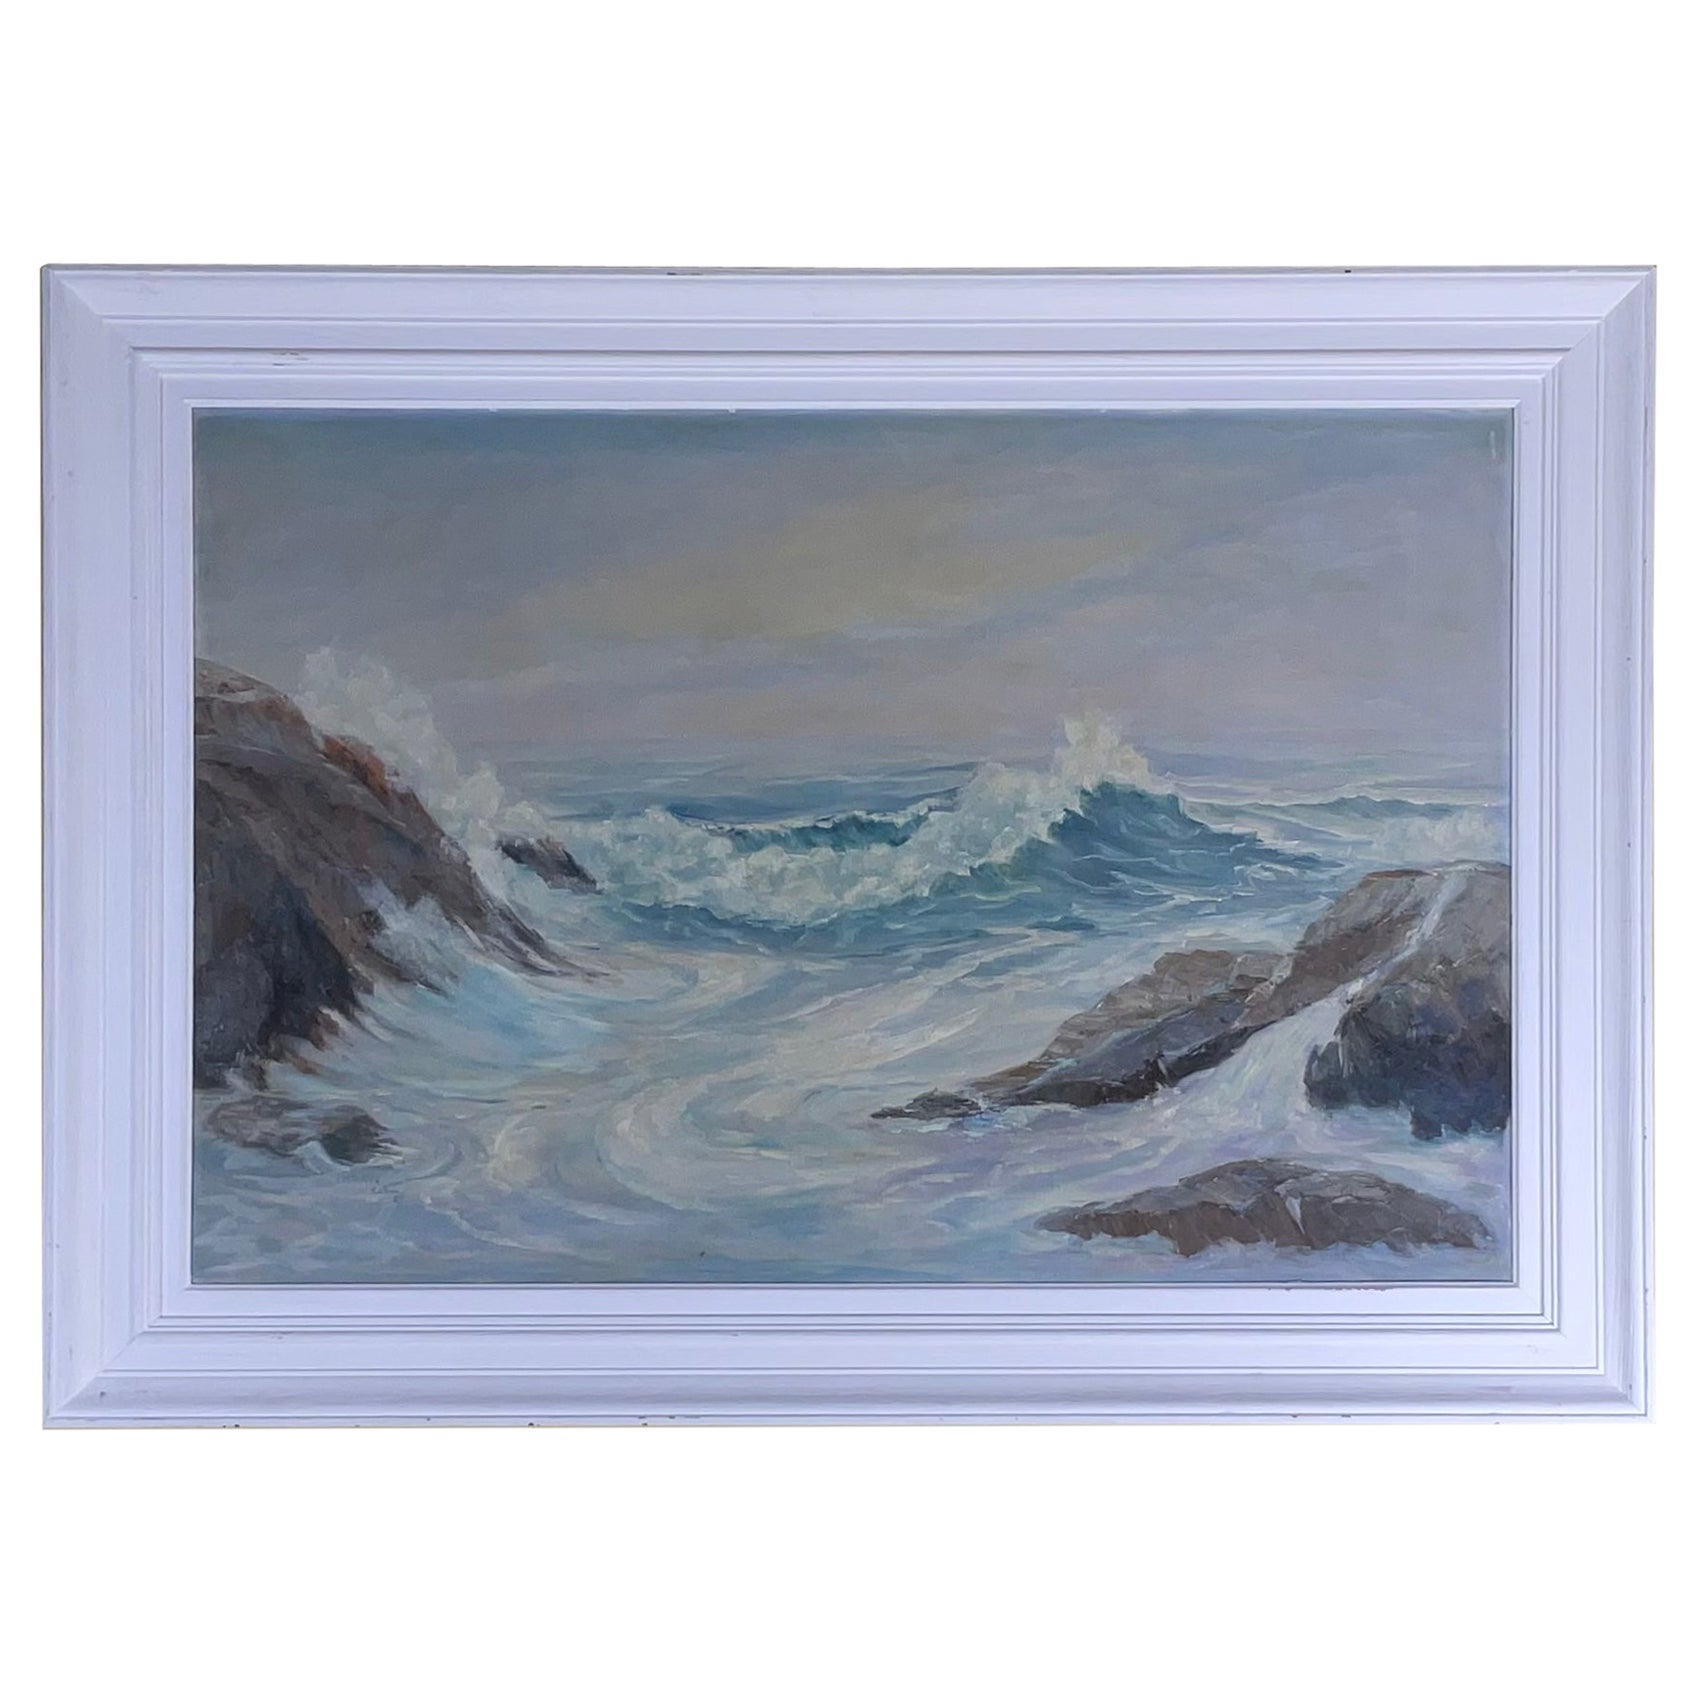 Vintage, Stormy Seascape Oil Painting on Canvas